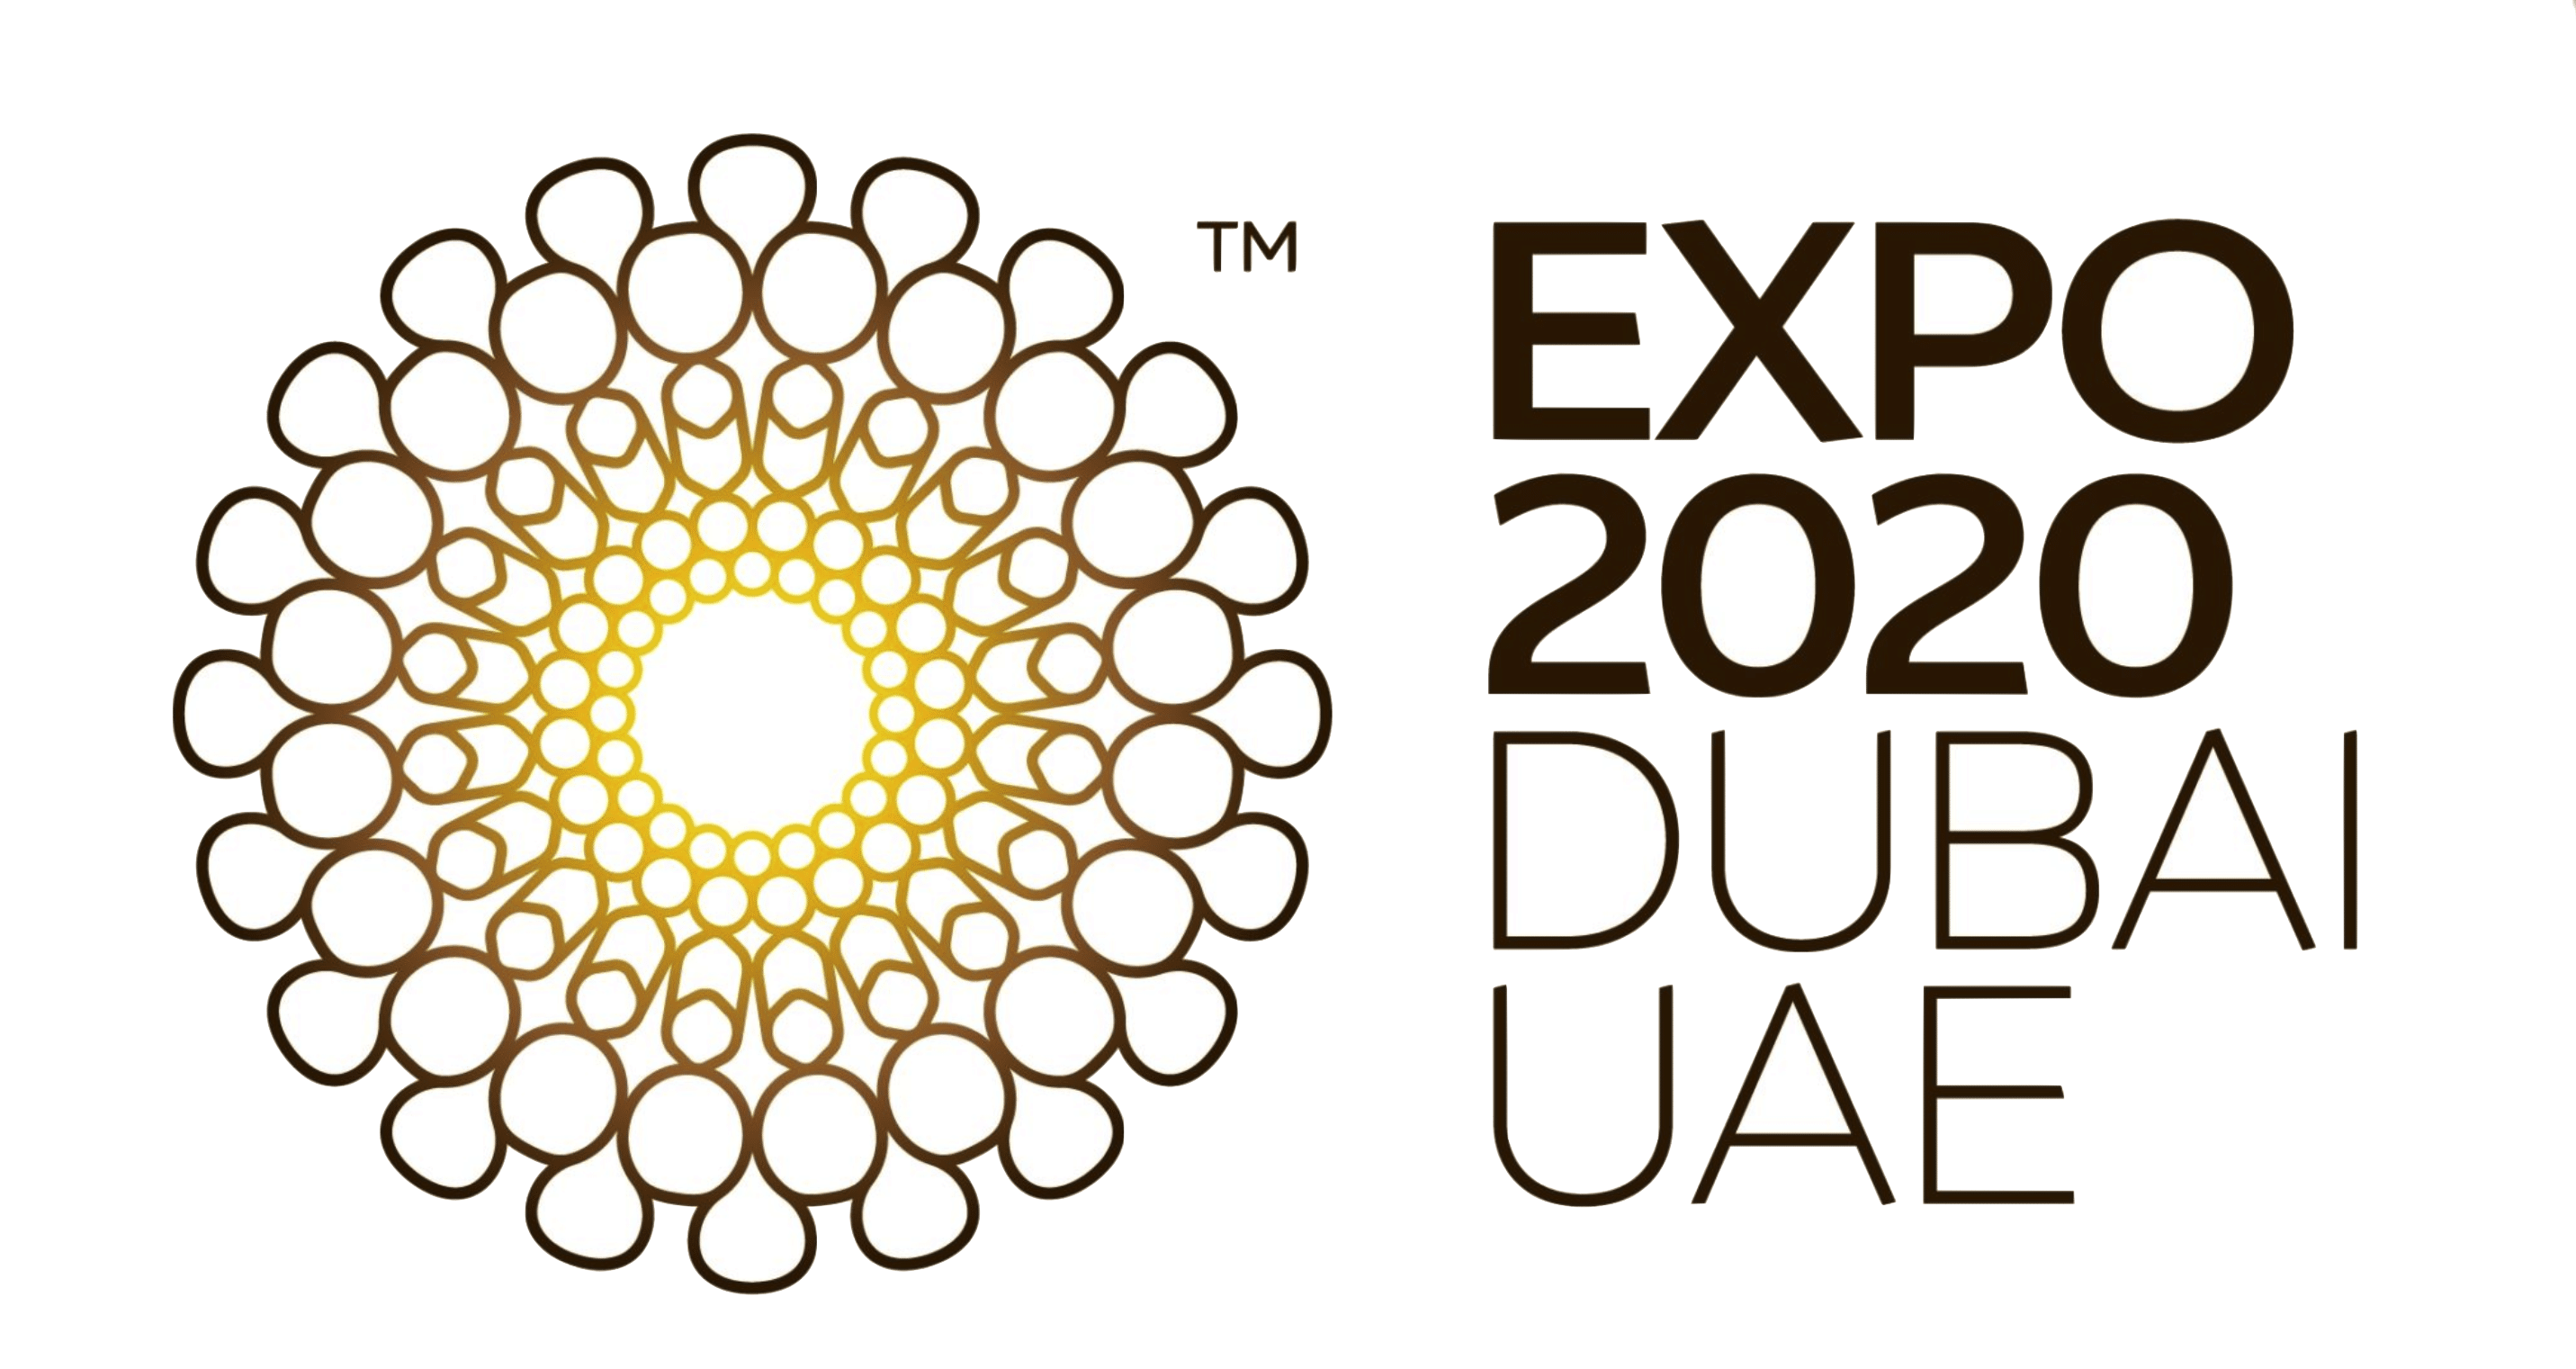 Expo 2020 will inspire people to make changes that will create a more sustainable future